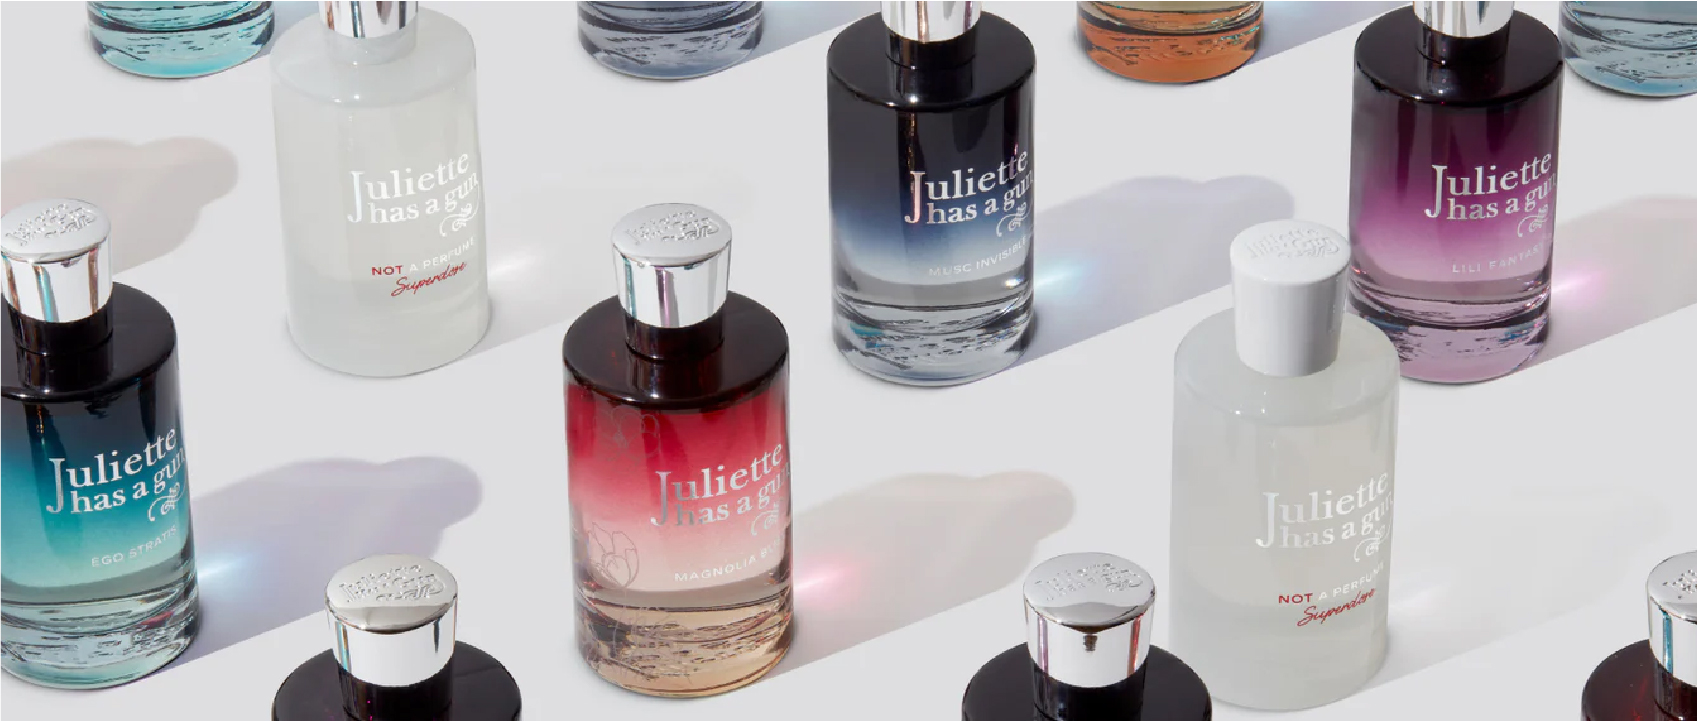 bottles of fragrance from the juliette has a gun collection